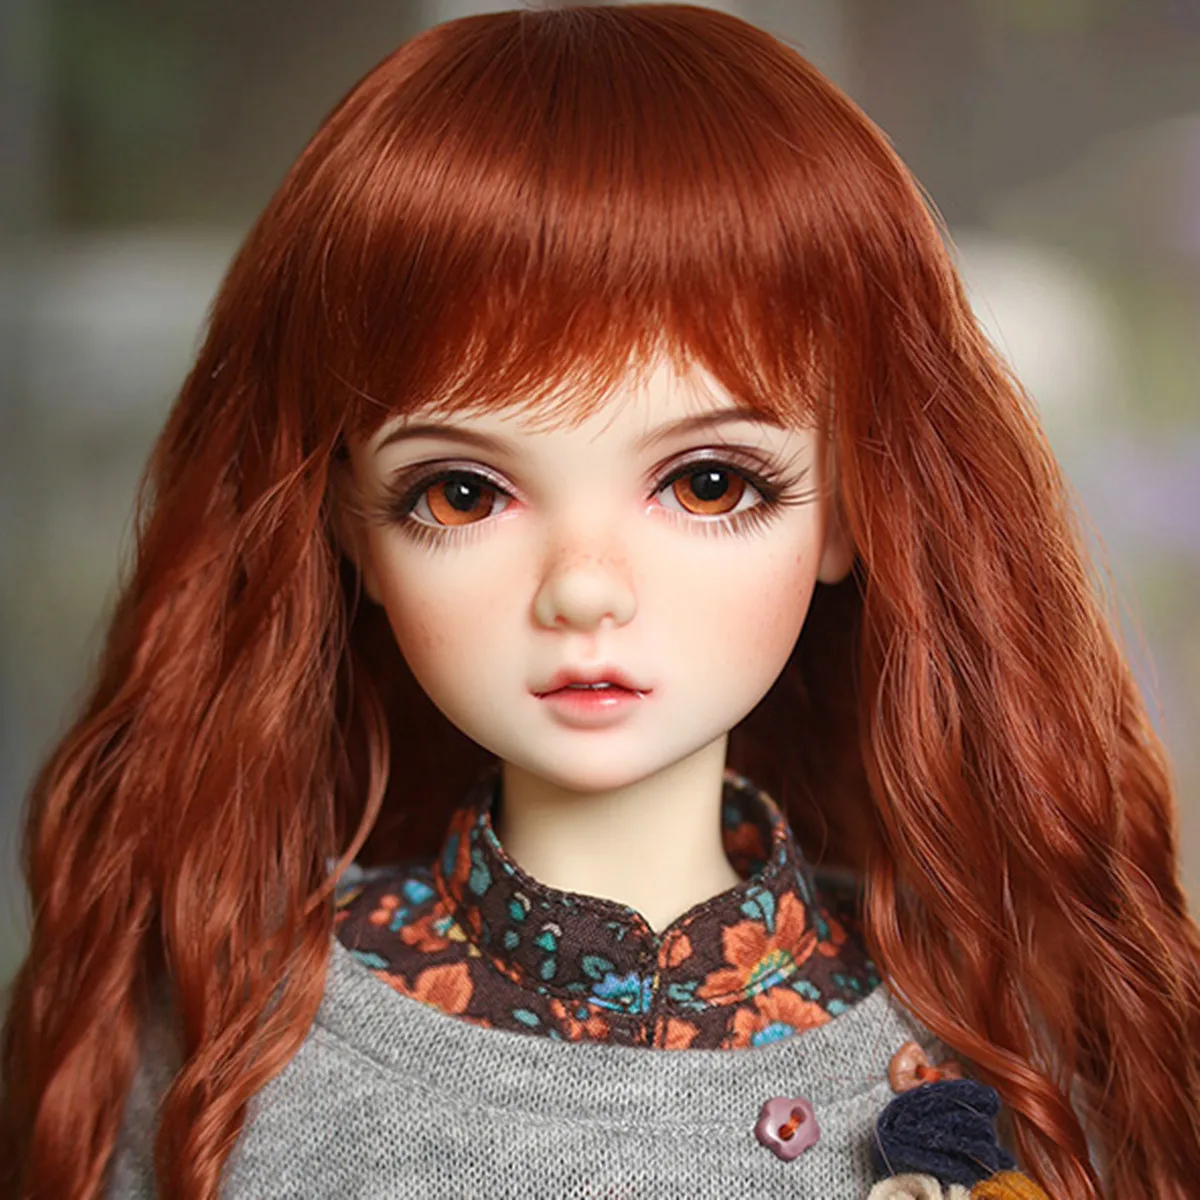 

45cm 1/4 new BJD sd amy girl jointed doll birthday gift premium dolls resin block spot toy makeup